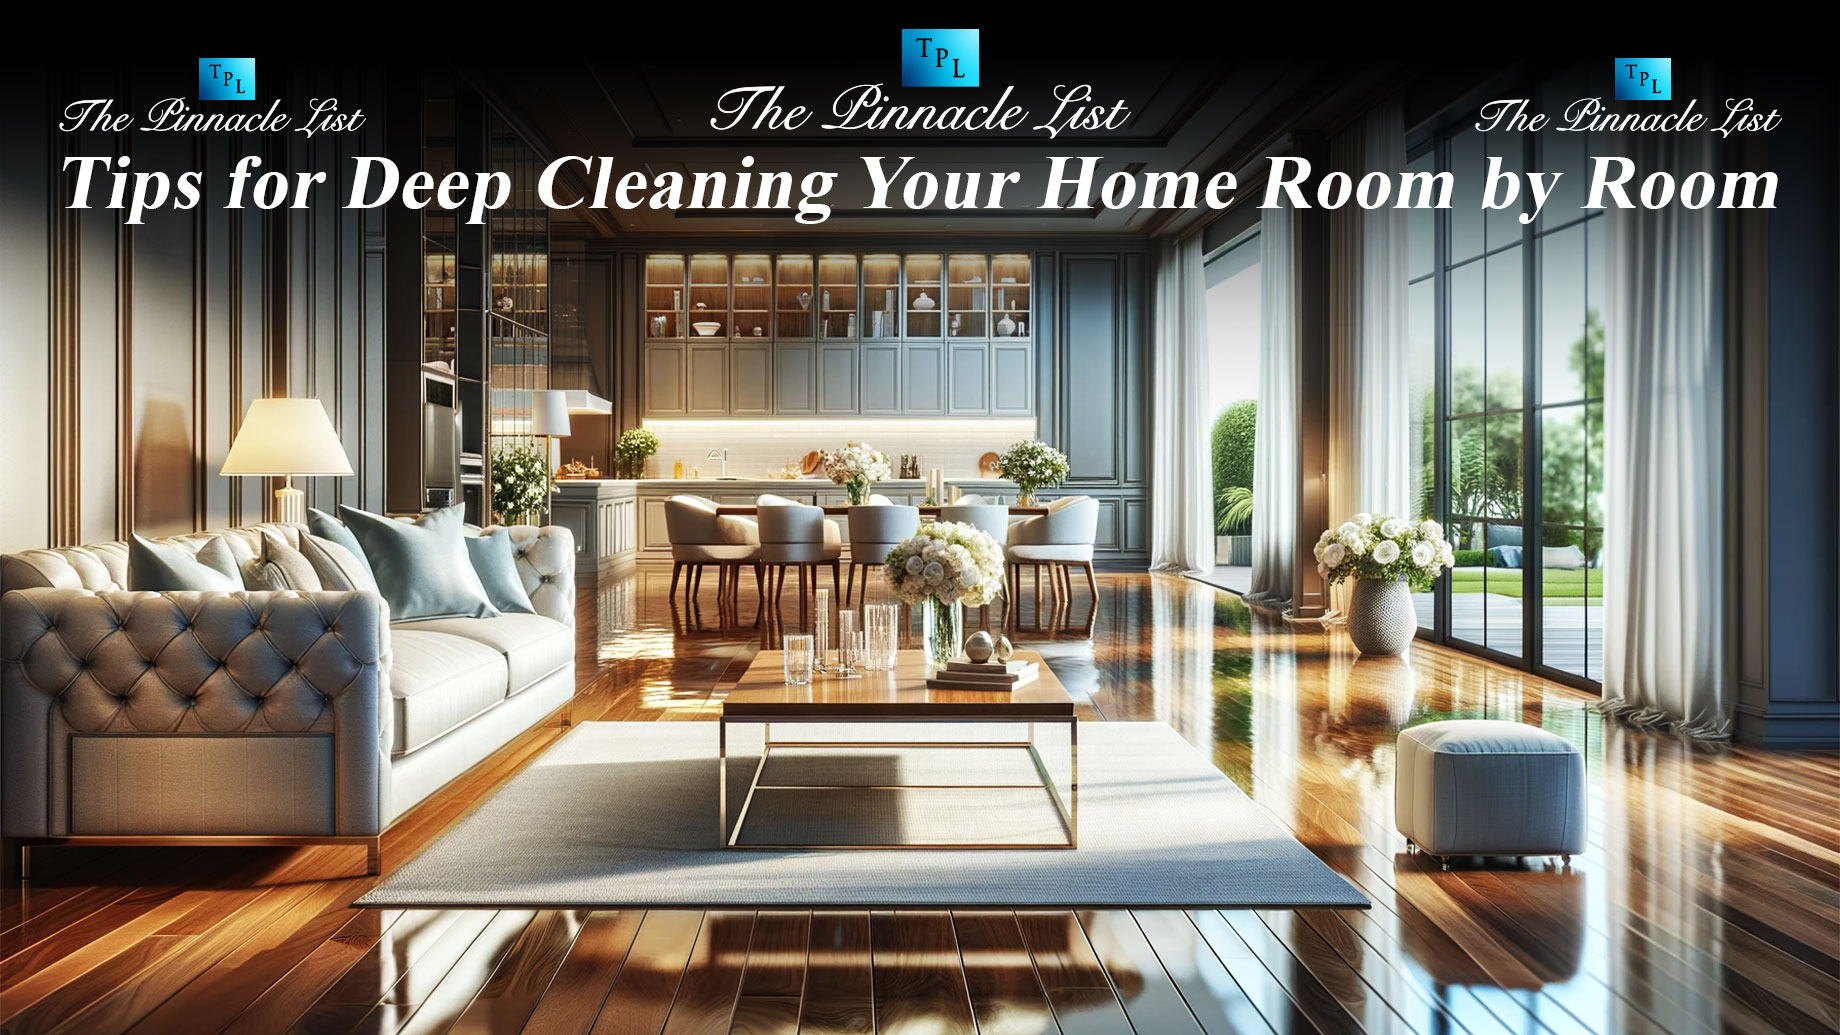 Tips for Deep Cleaning Your Home Room by Room